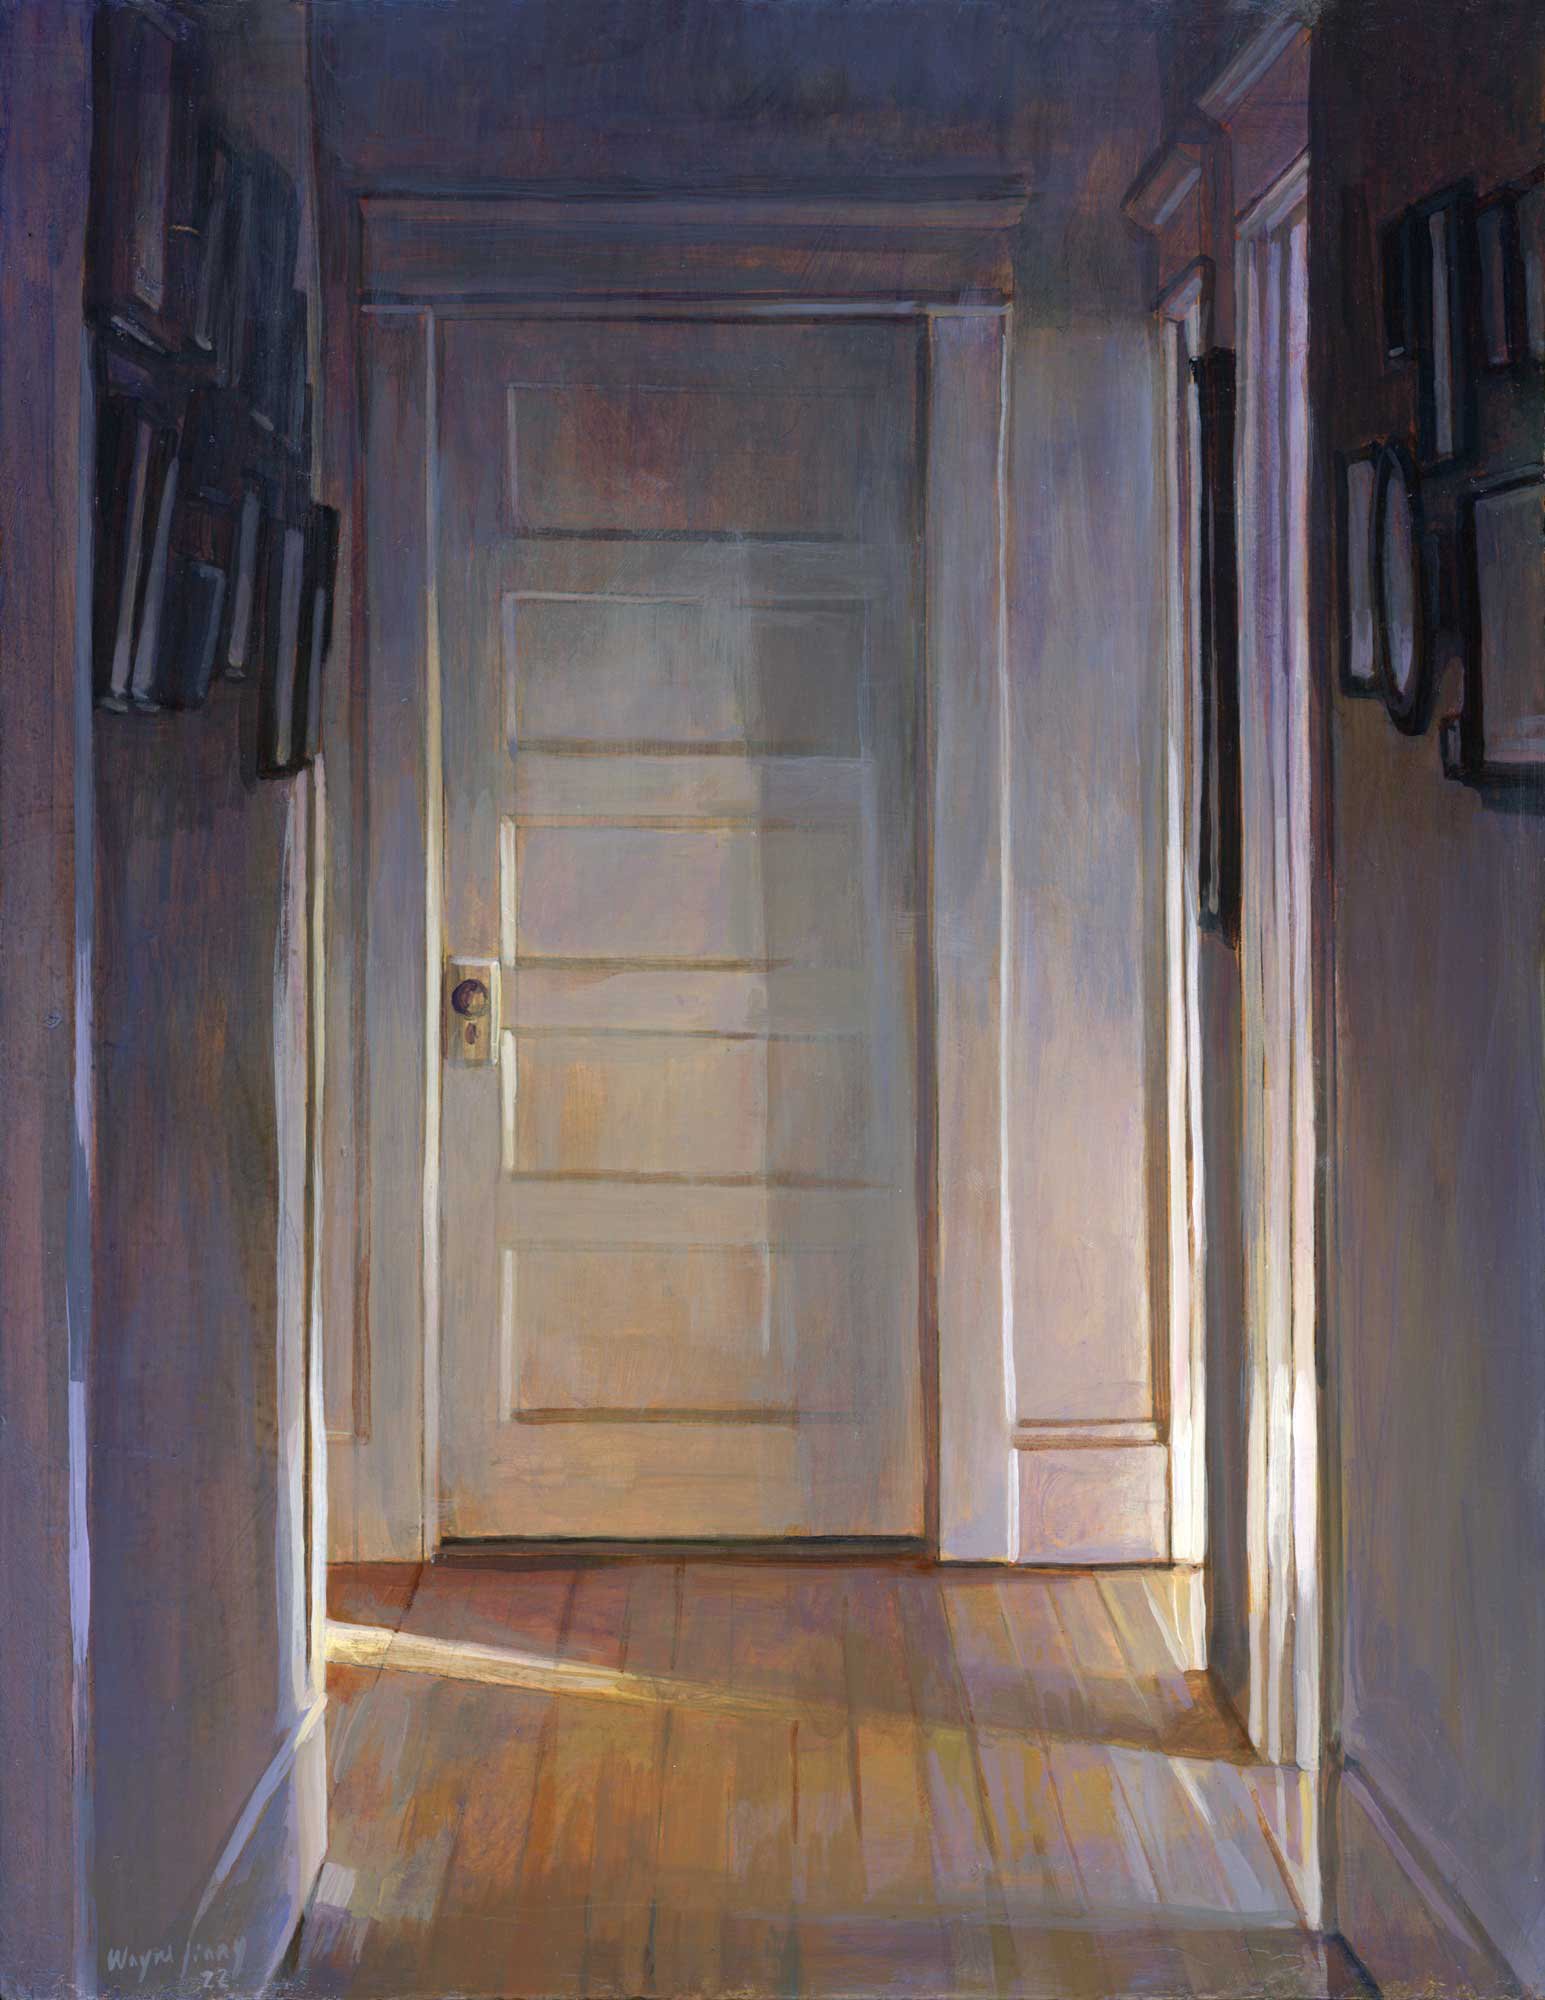 Door at the End of the Hallway by Wayne Jiang